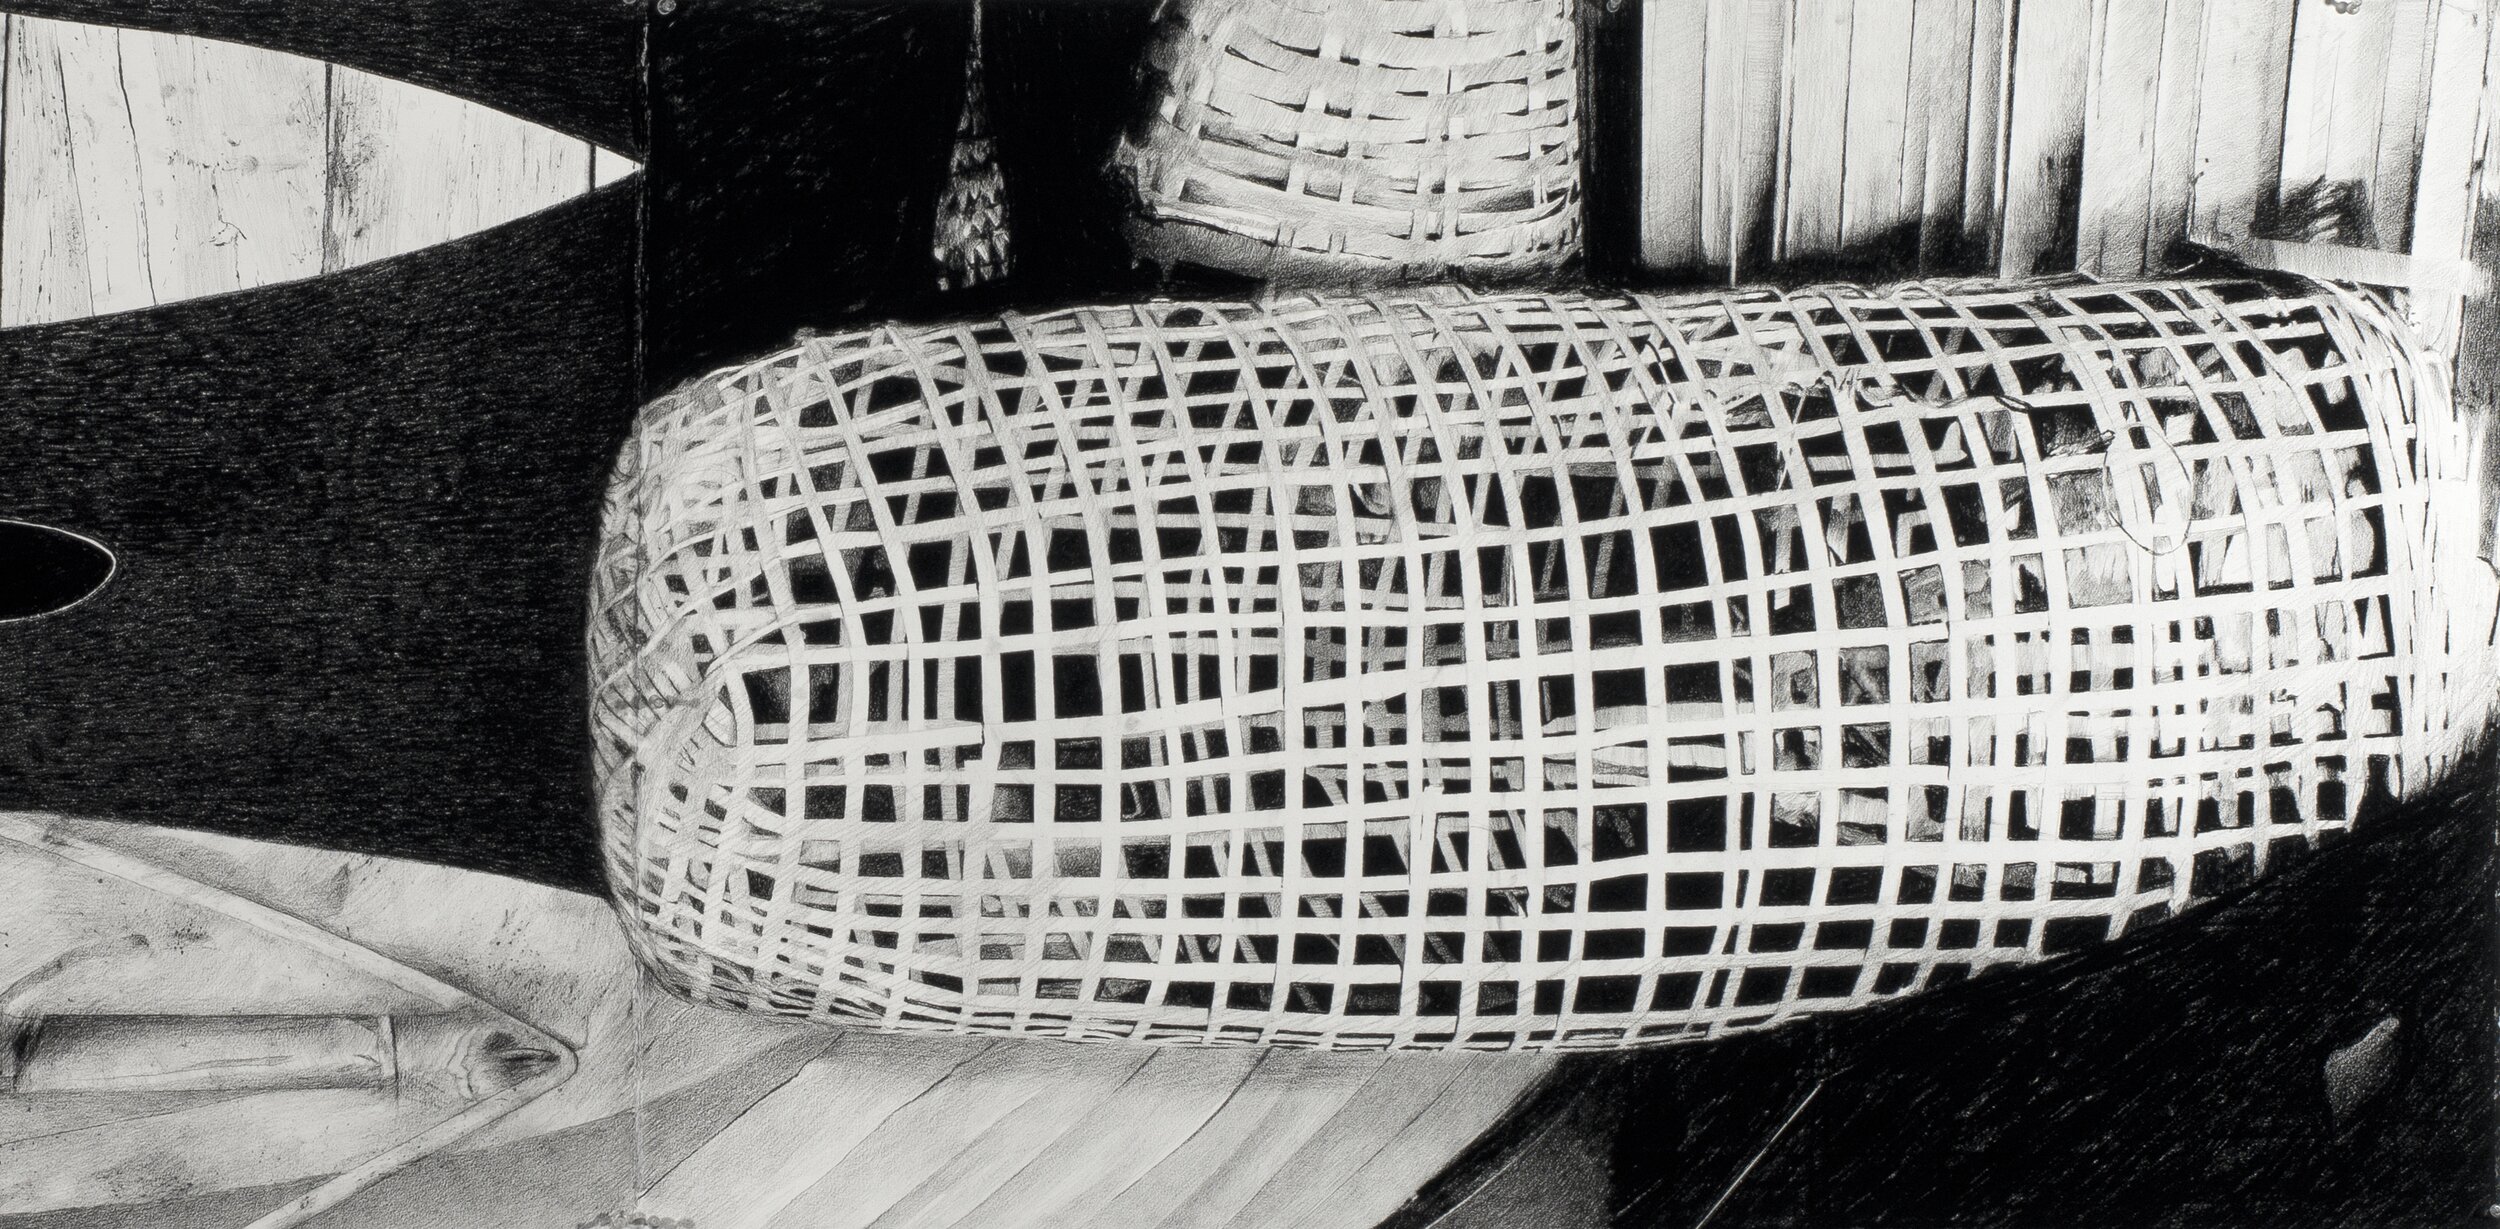  'Shape of things to come' (detail) 2013 Charcoal on BFK Rives 90 x 364cm 